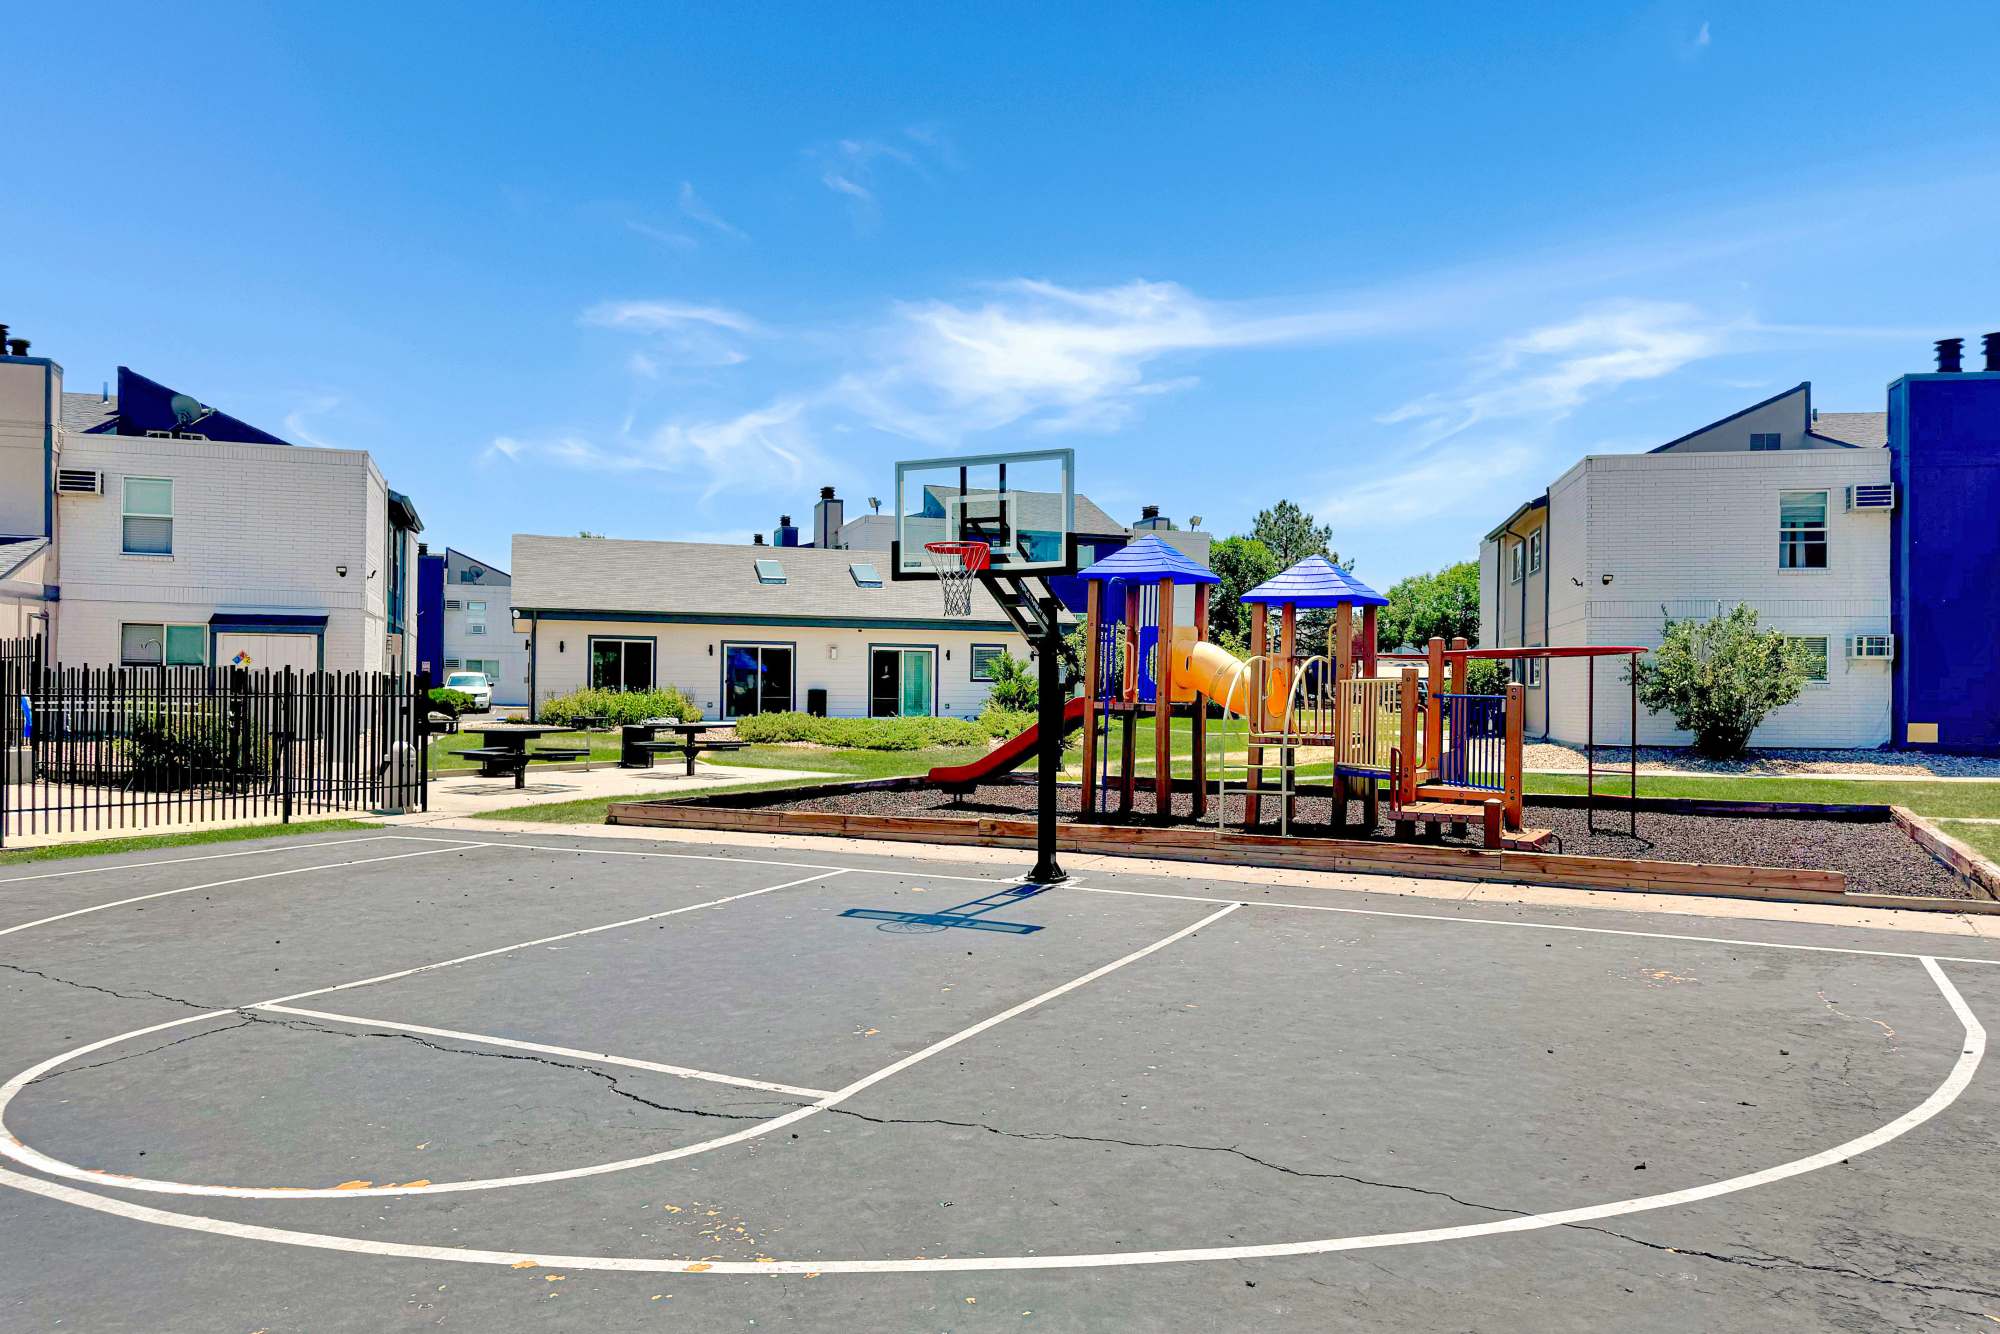 A basketball court next to the playground at Ascent at Lowry in Denver, Colorado